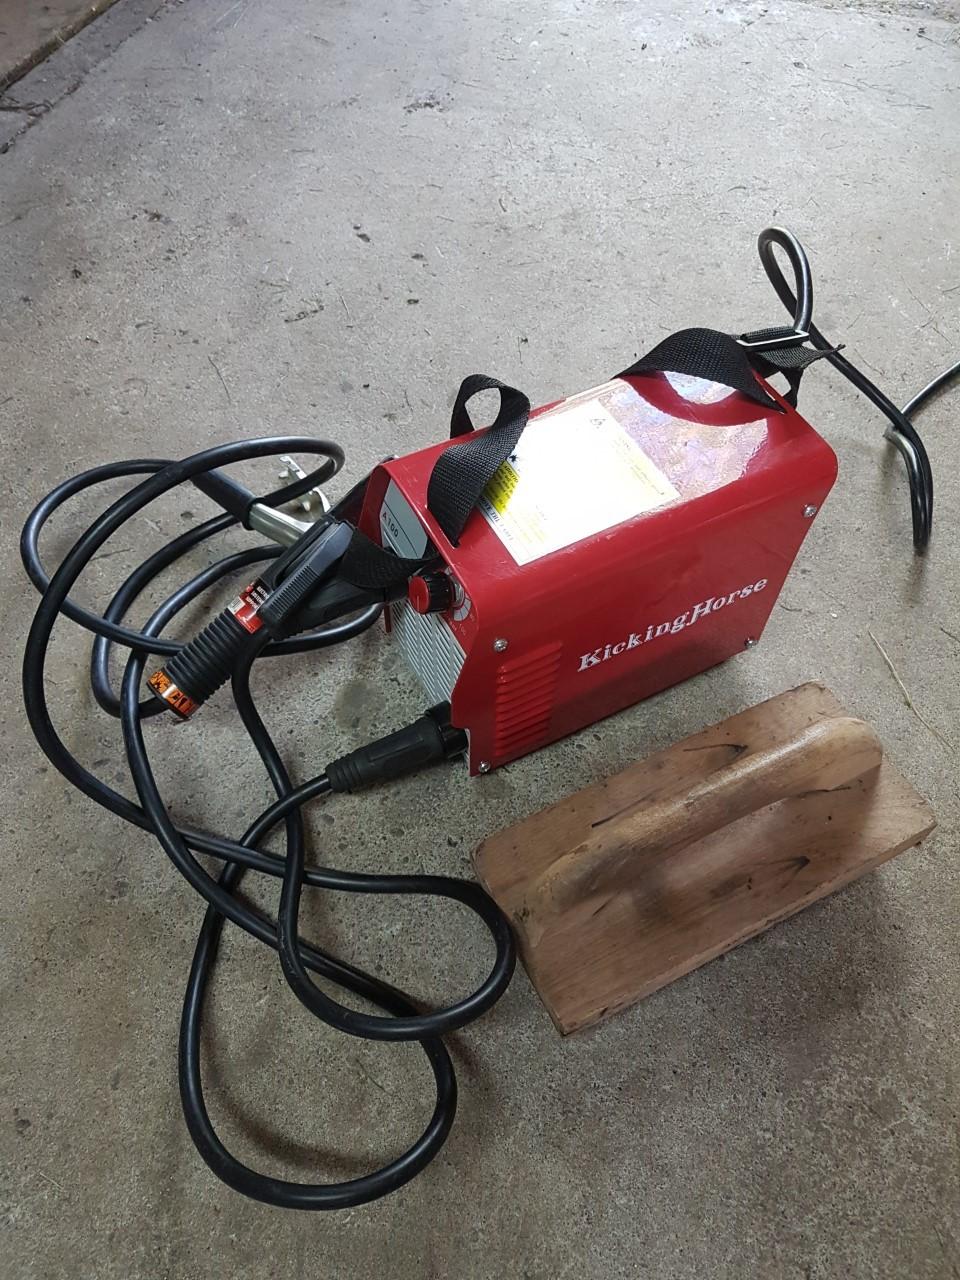 Tool Time At the spring convention, Ben Mangan used an electric welder for part of his clinic. He talked about the practicality of carrying one in his truck and using it in his everyday work.